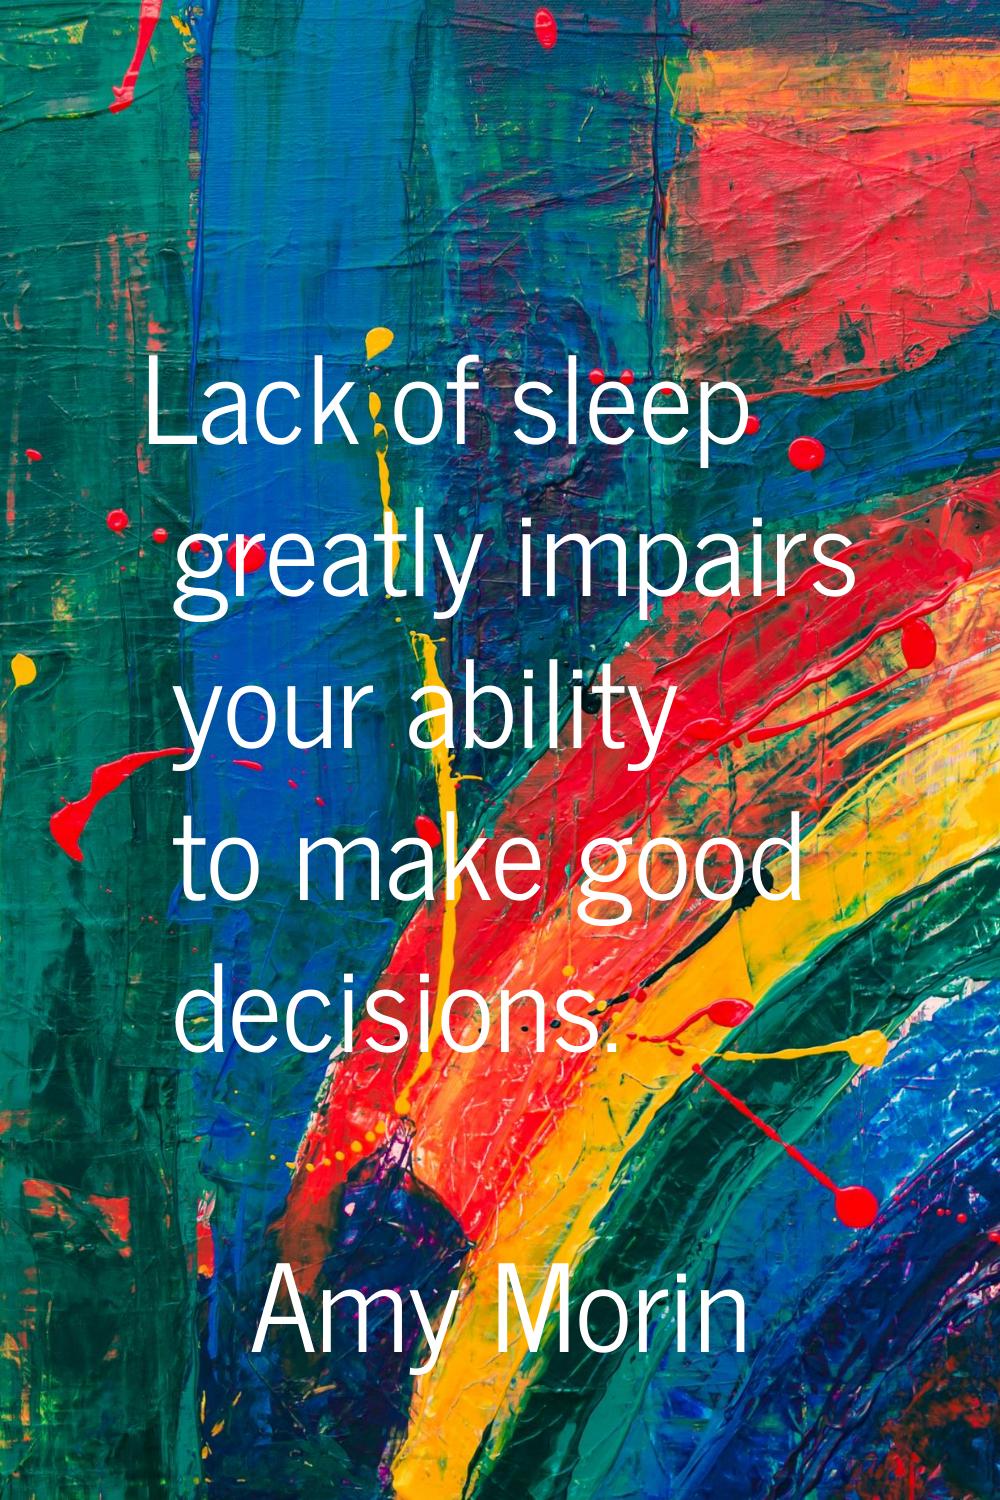 Lack of sleep greatly impairs your ability to make good decisions.